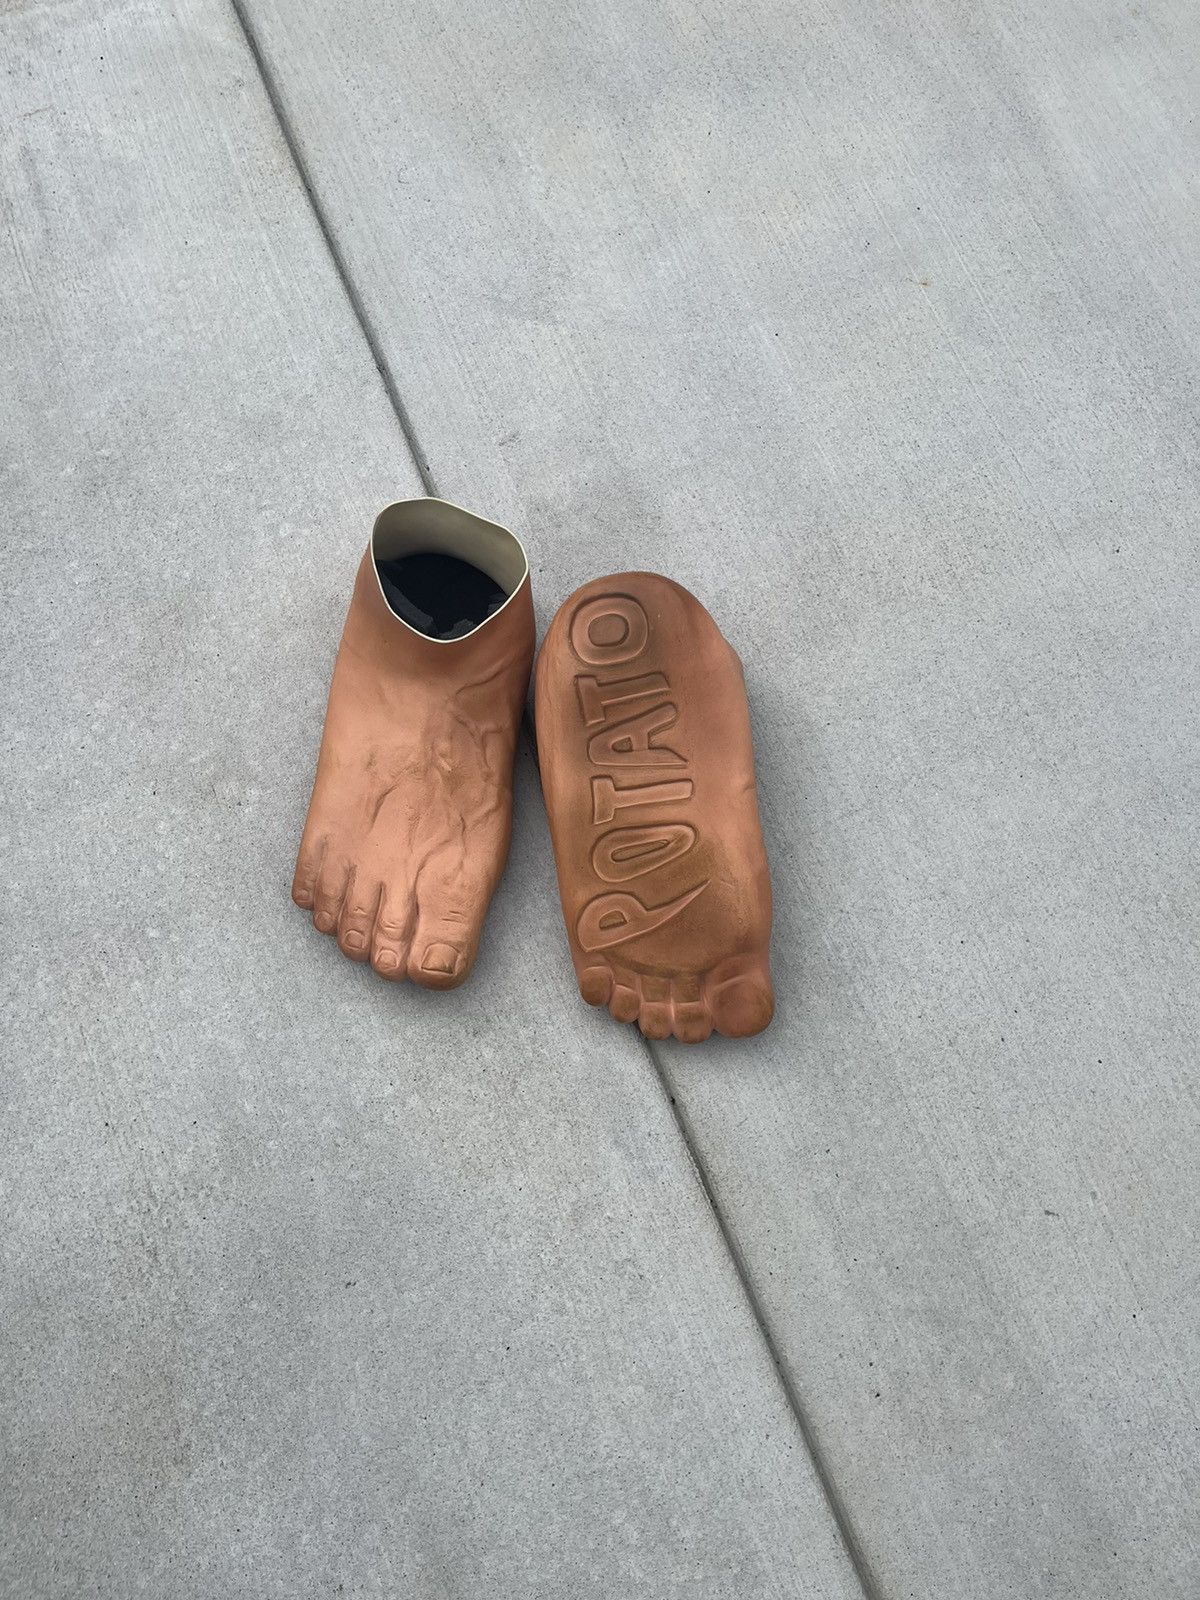 The holy grail of footwear. The Imran Potato Caveman Slippers. :  r/ofcoursethatsathing